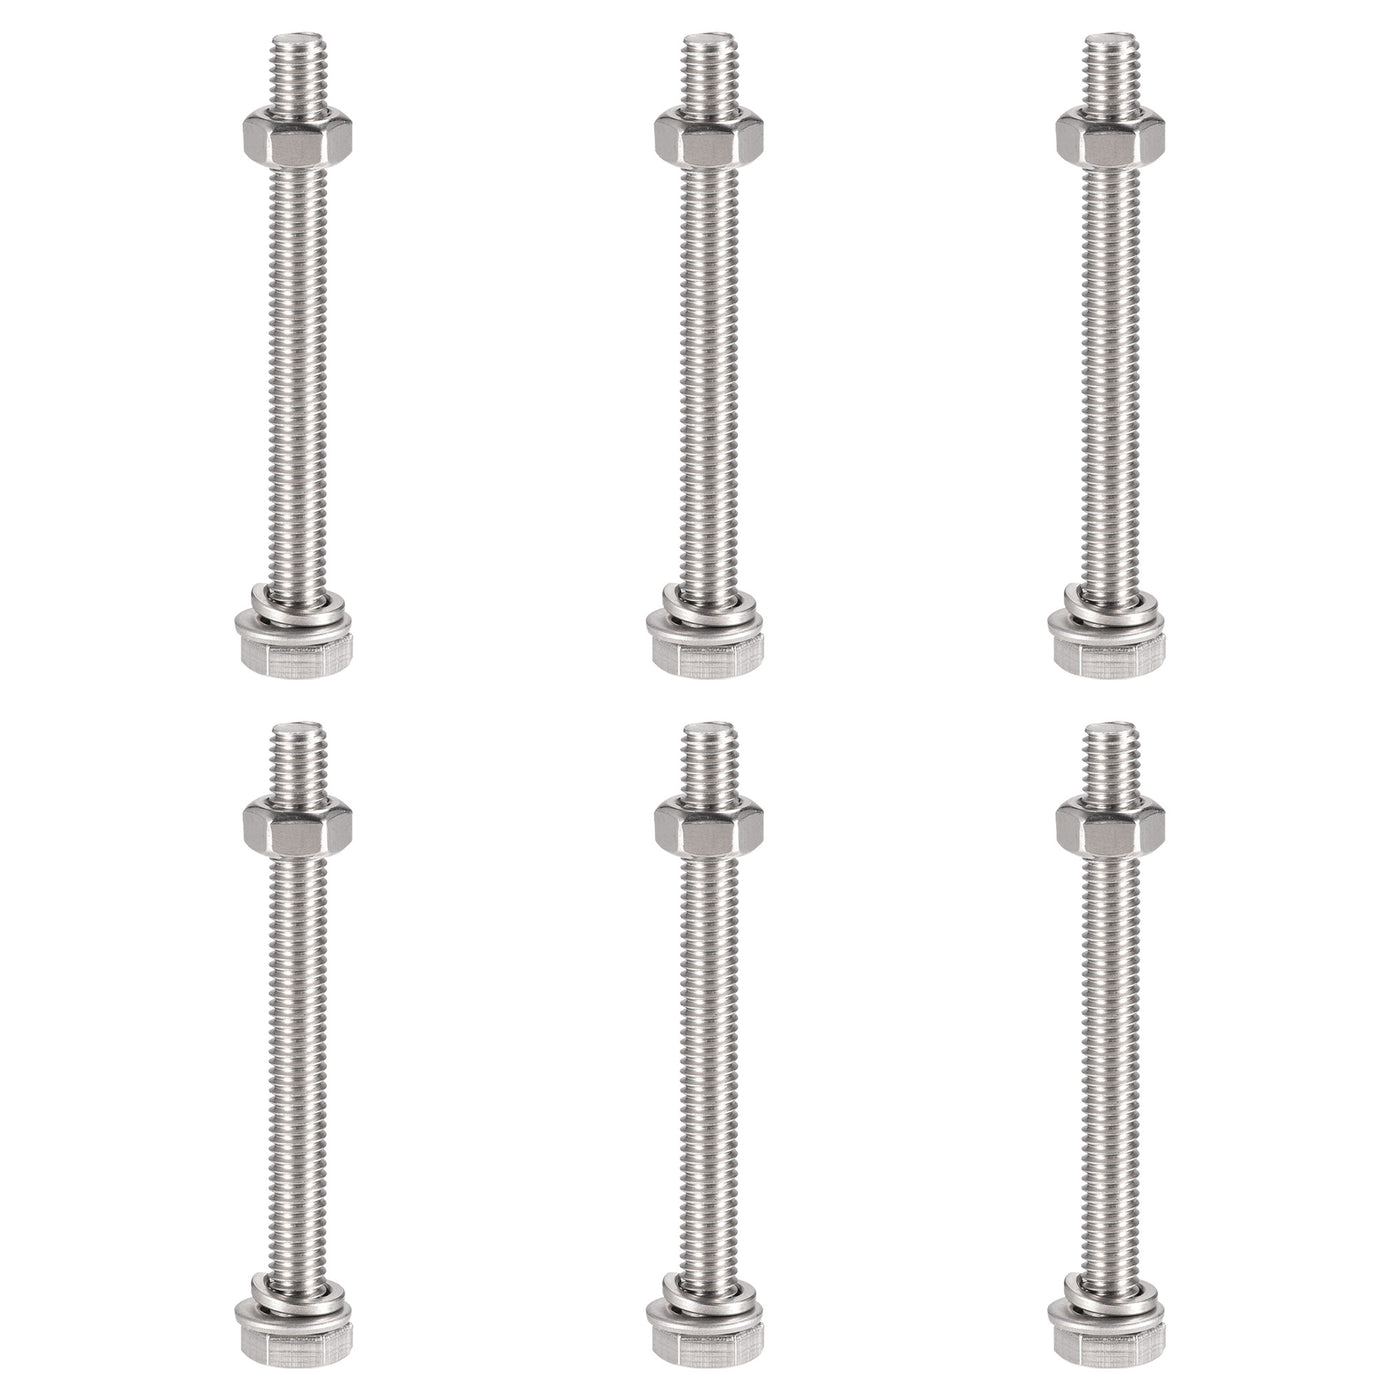 uxcell Uxcell M6 x 65mm Hex Head Screws Bolts, Nuts, Flat & Lock Washers Kits, 304 Stainless Steel Fully Thread Hexagon Bolts 6 Sets